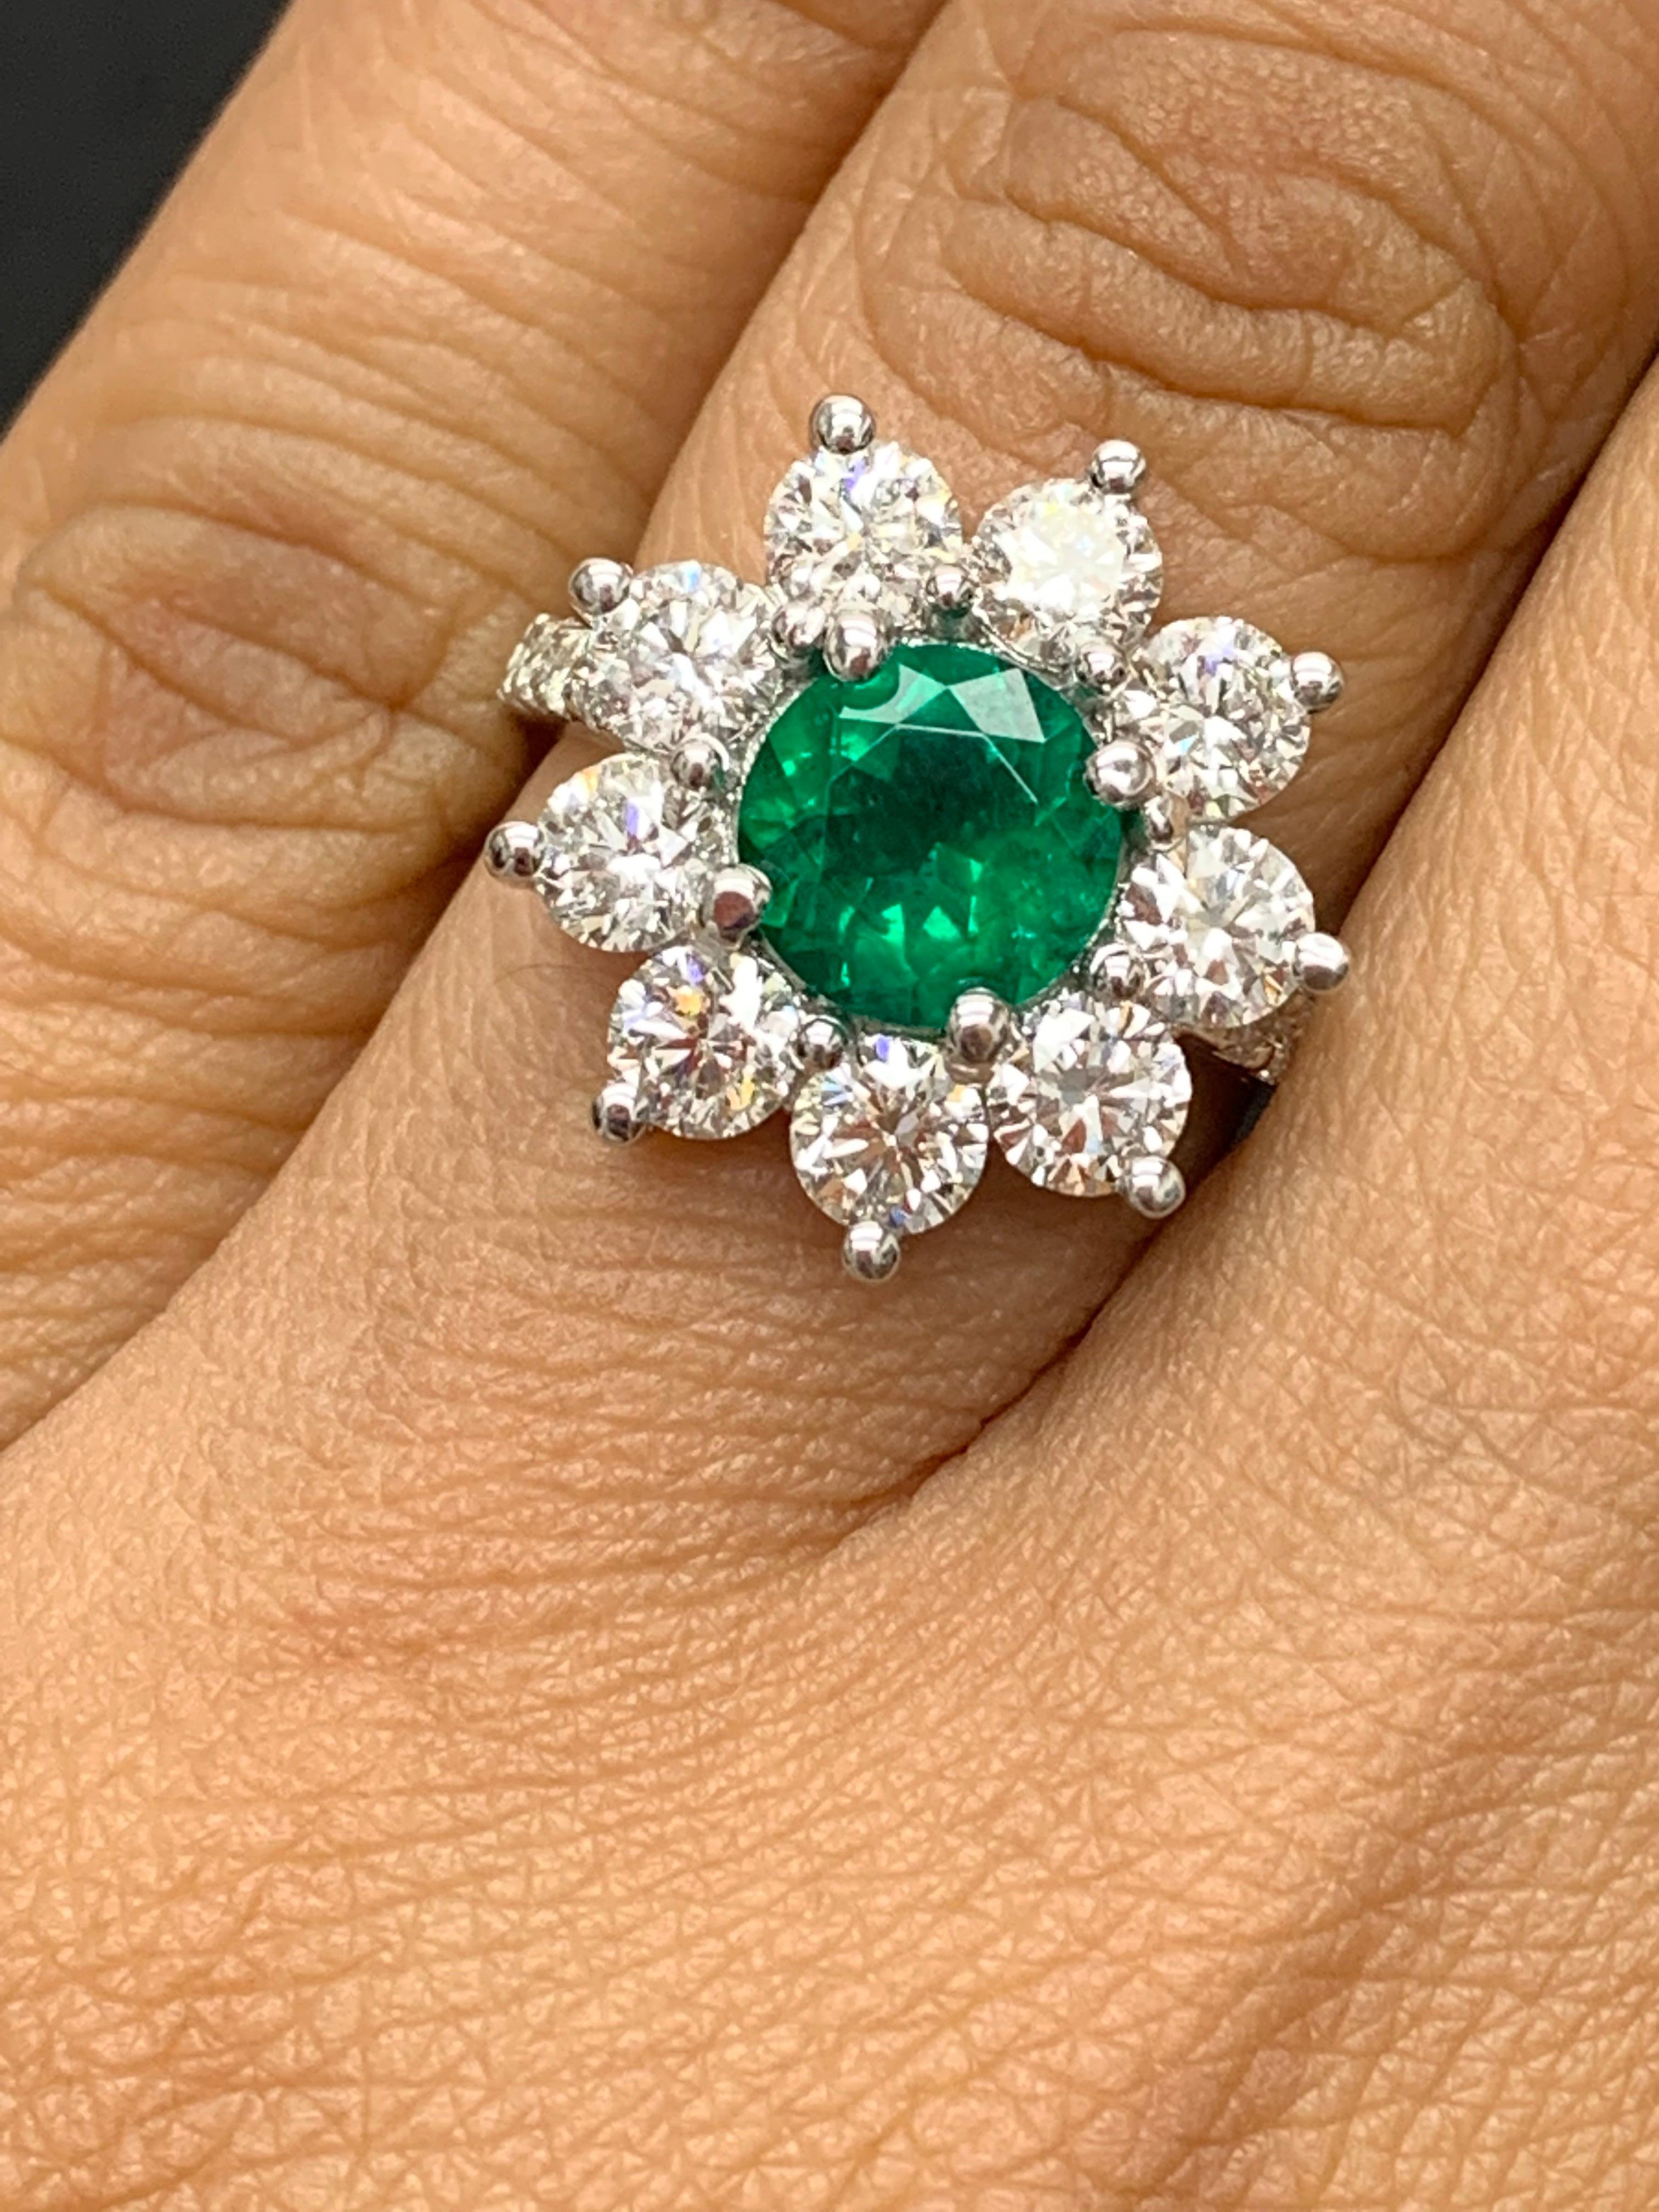 1.18 Carat Brilliant Cut Emerald and Diamond Ring in 14K White Gold For Sale 2